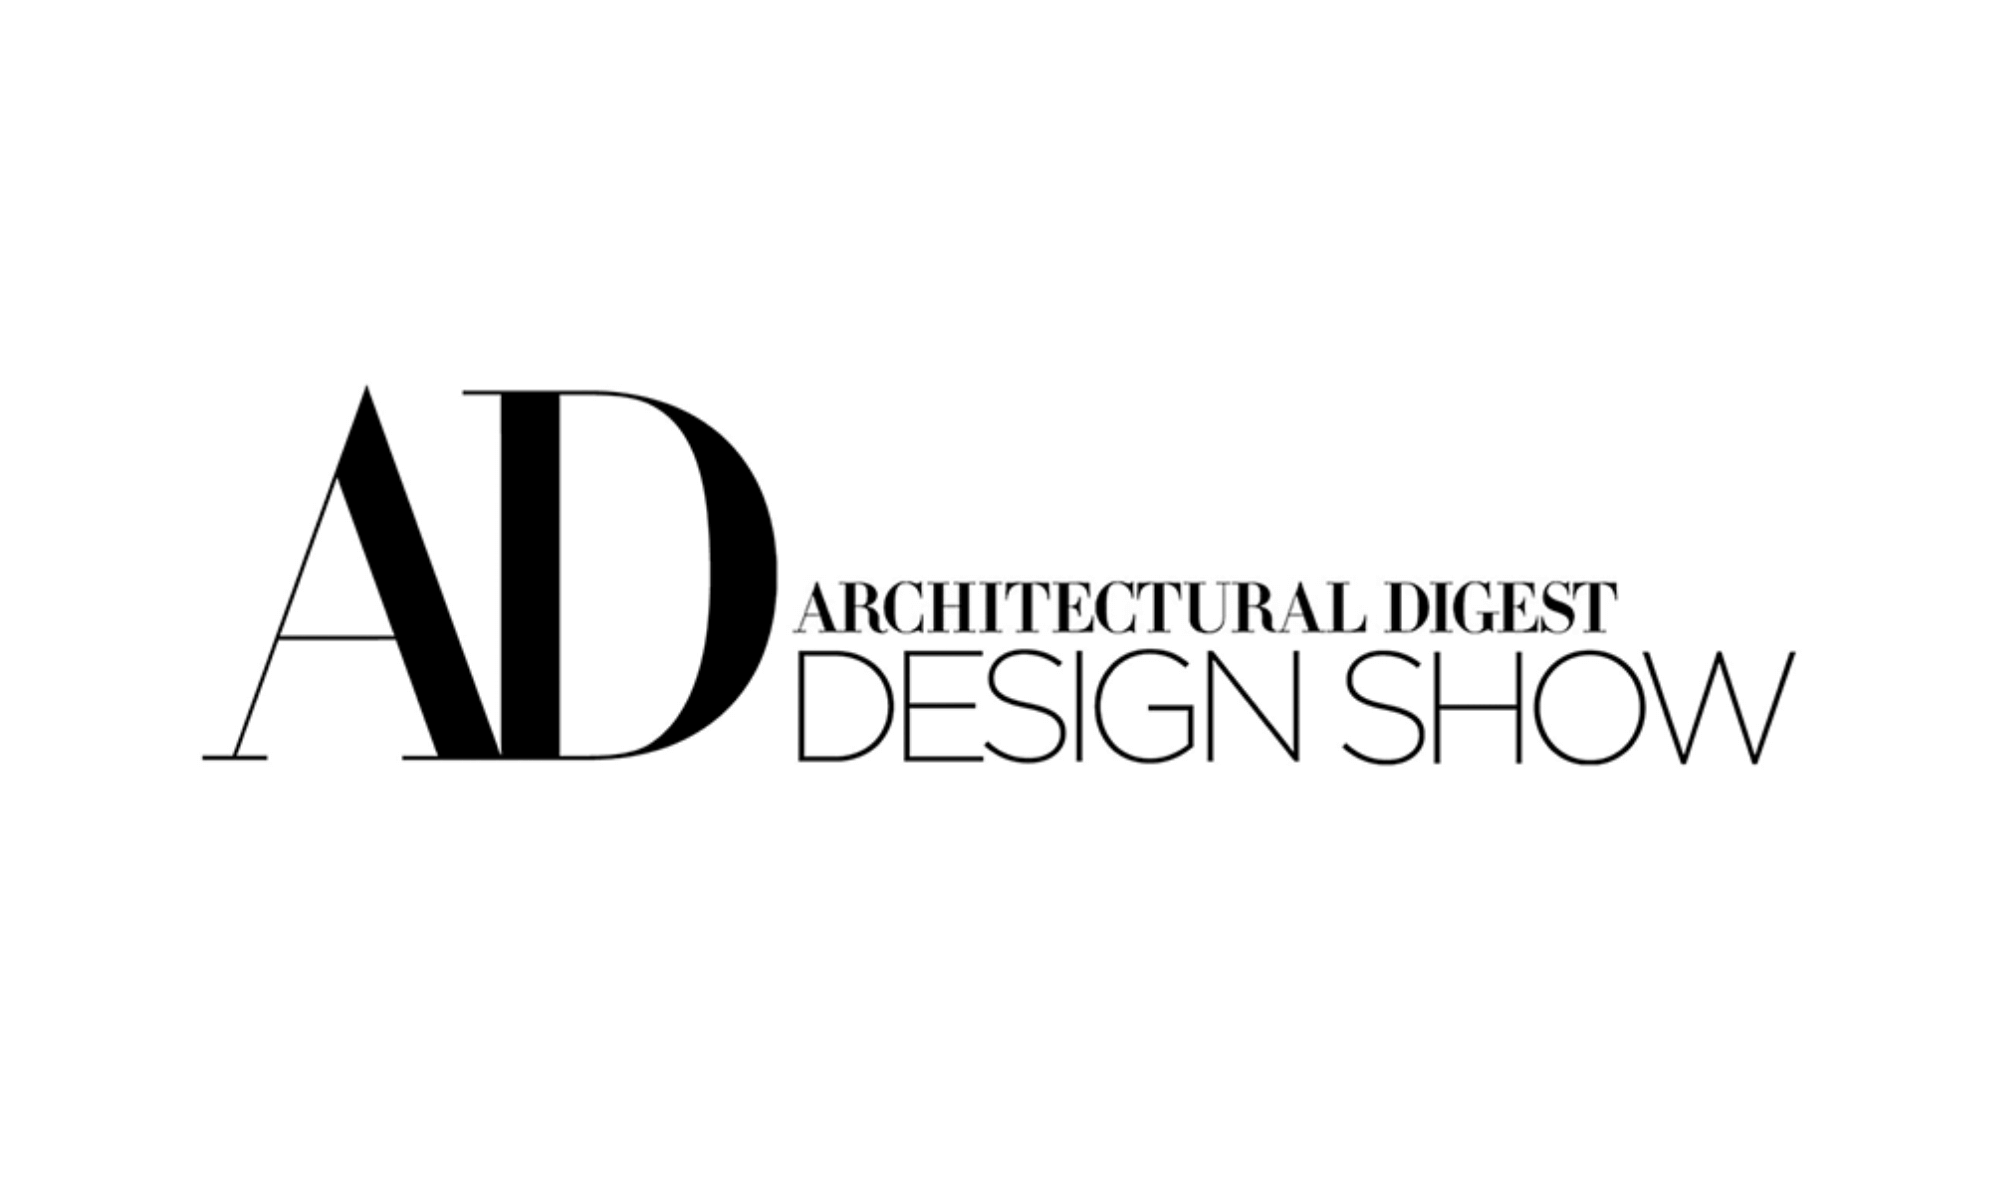 PRESS RELEASE: Harlem Candle Company X Architectural Digest Design Show